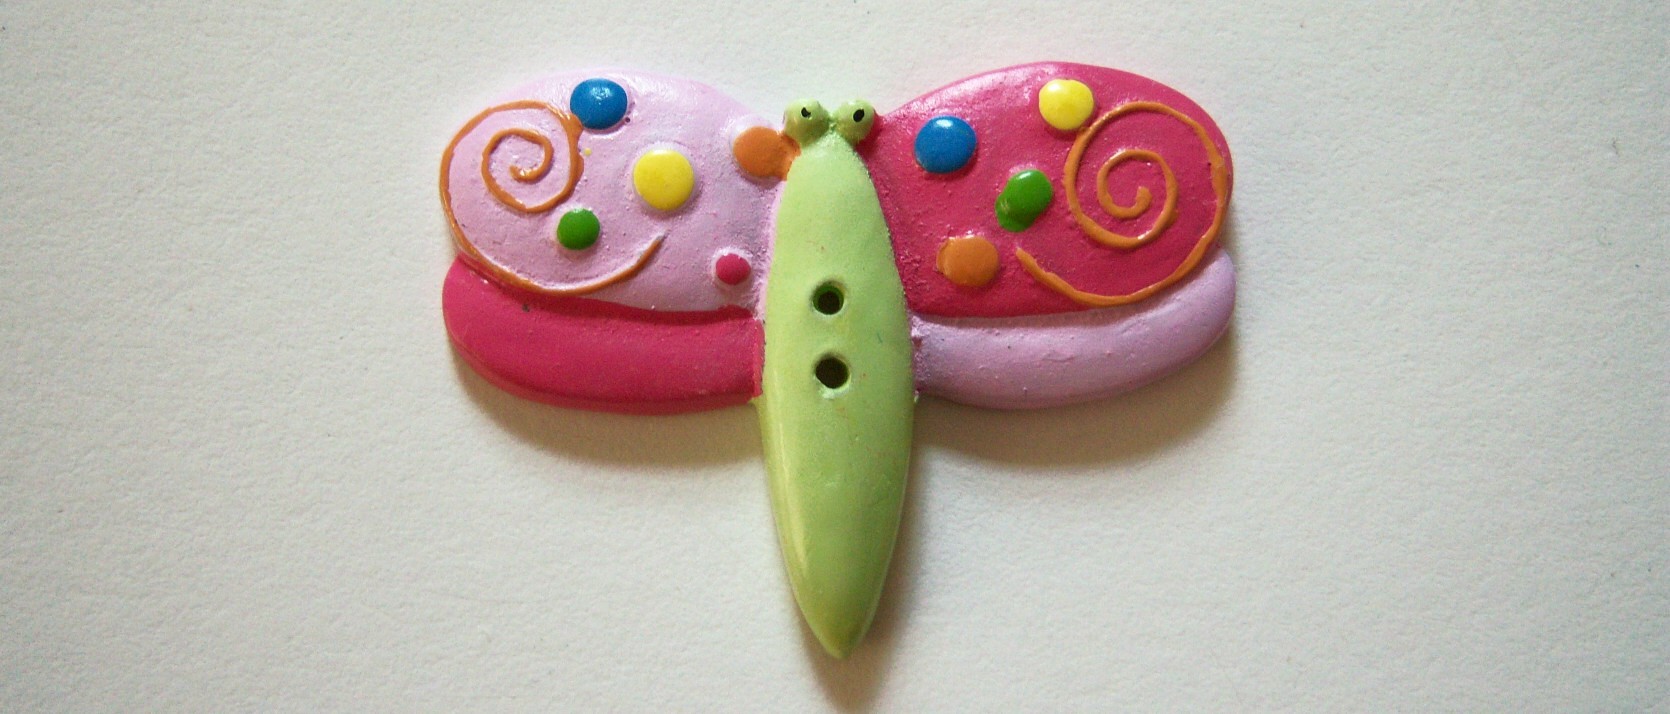 JHB Flutter butterfly lime and pinks 2" two hole polyresin button.